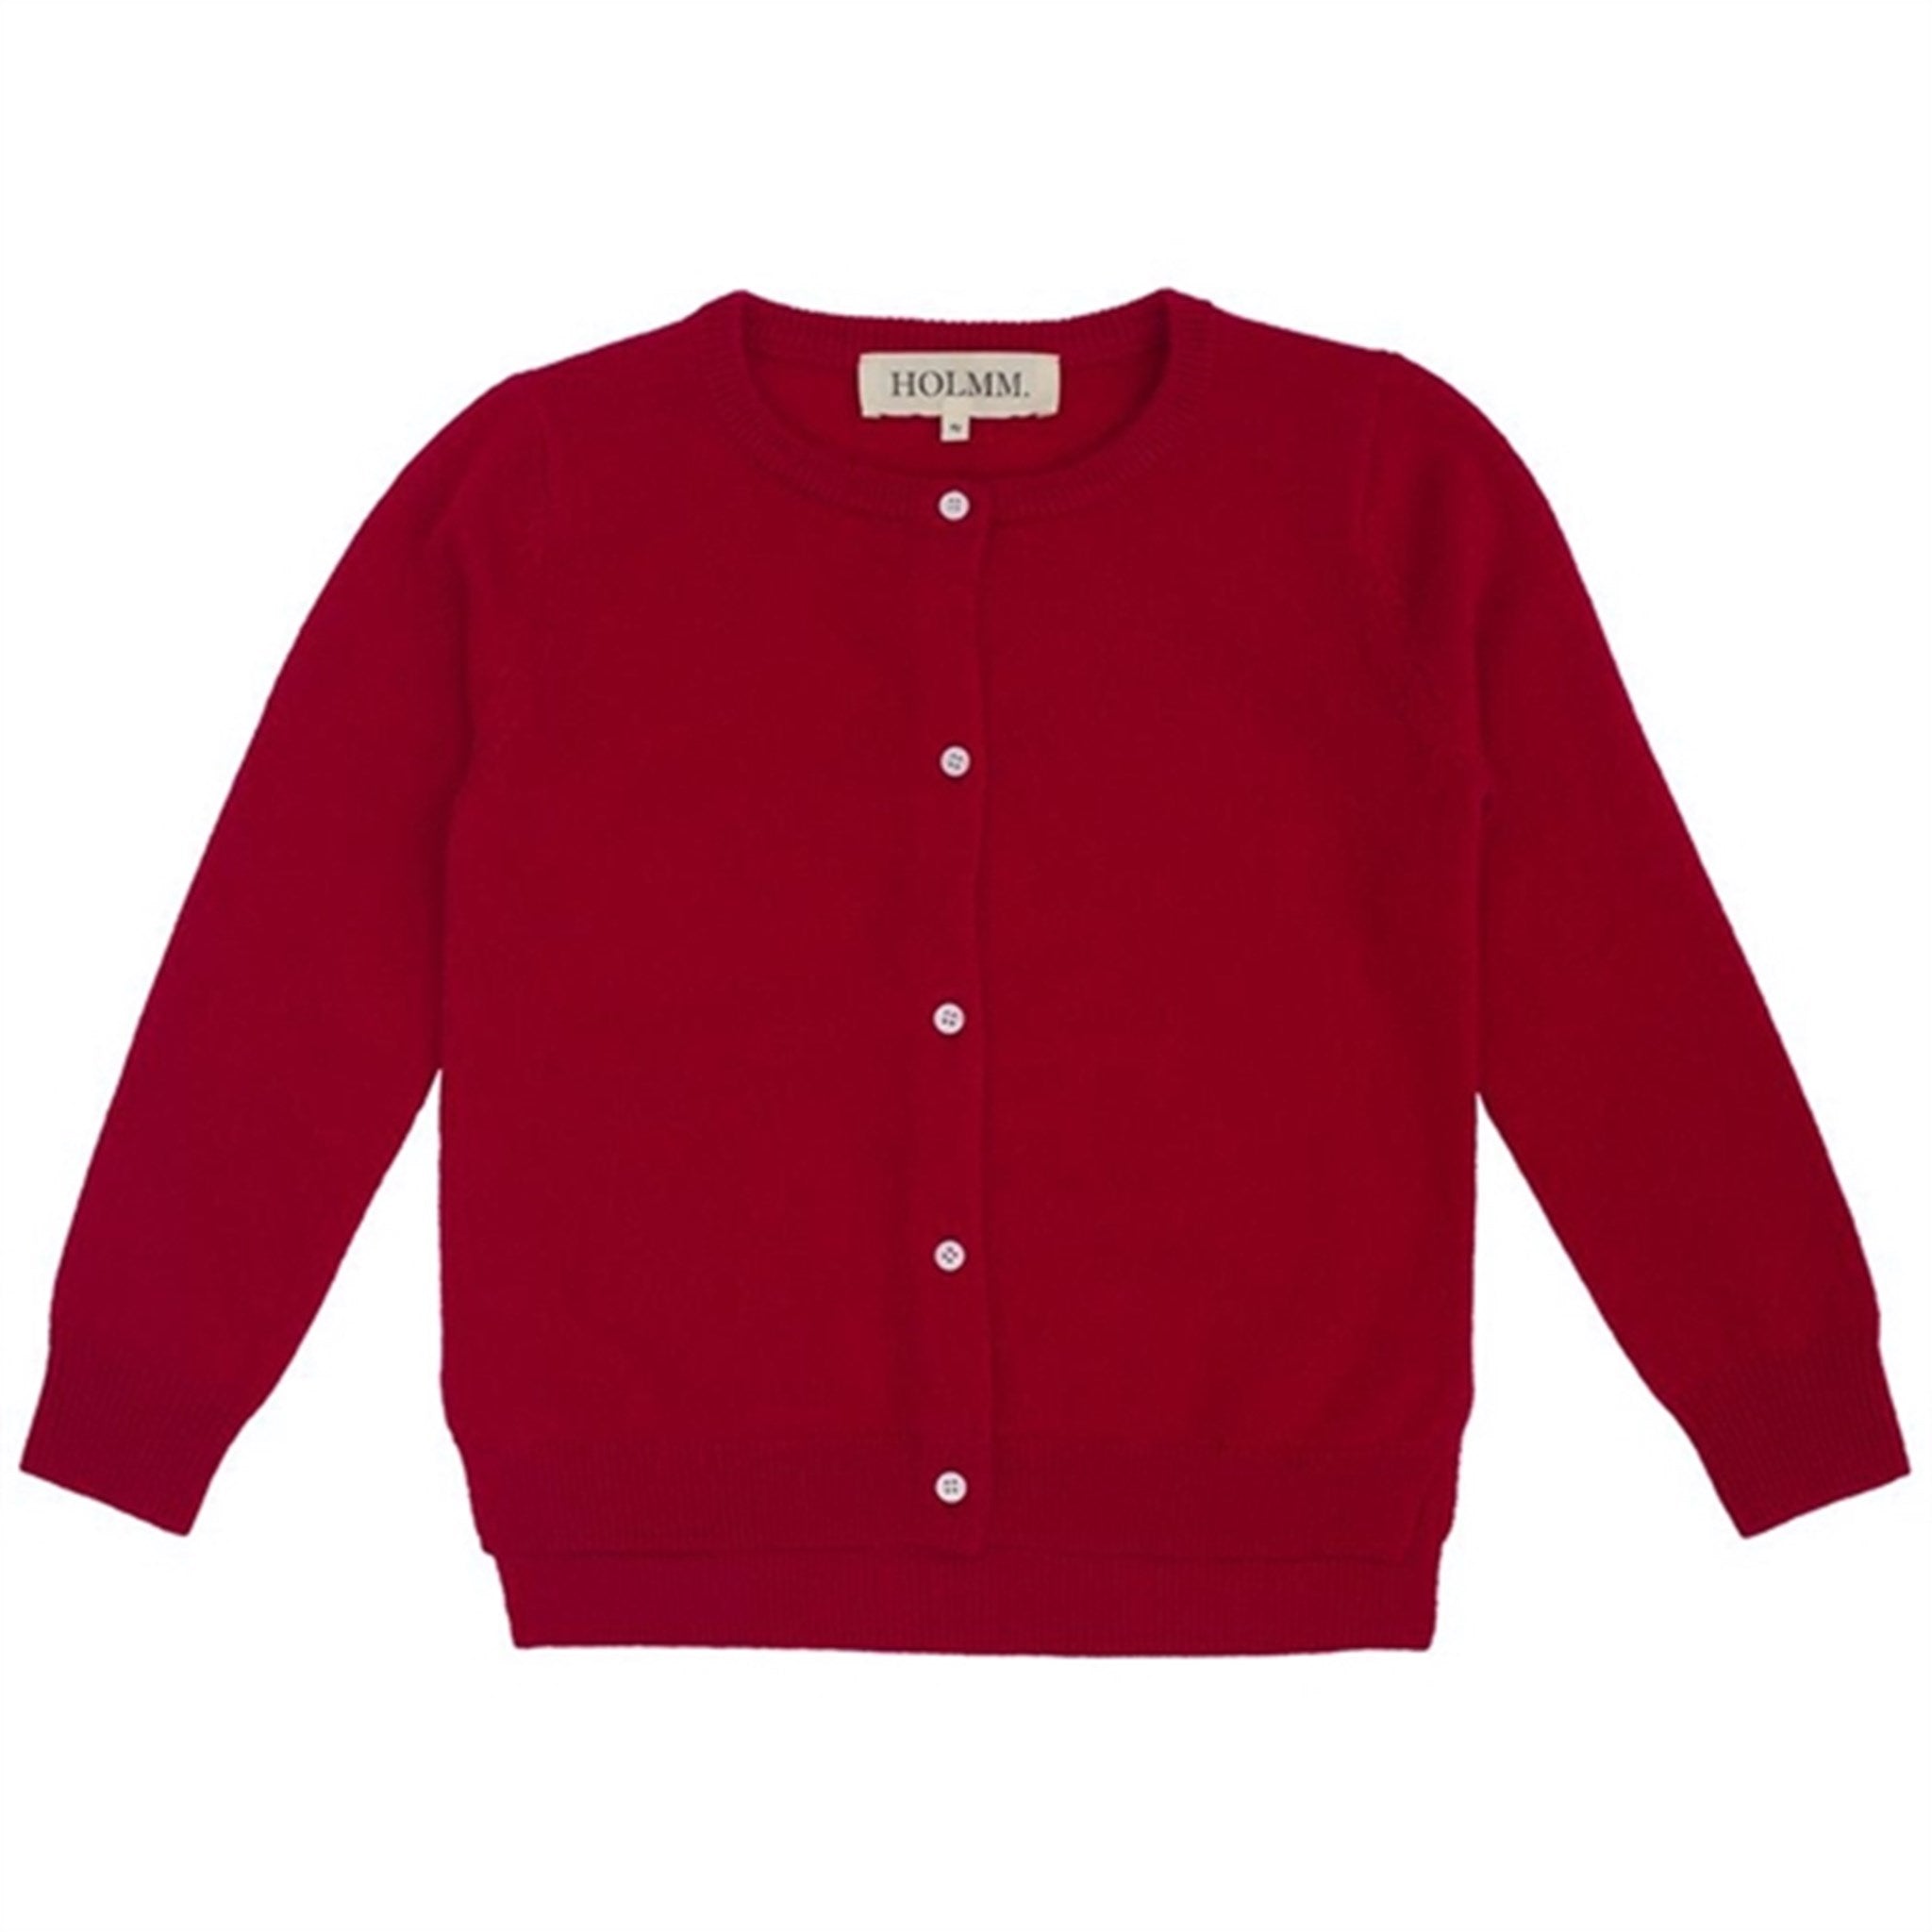 HOLMM Postbox Molly Cashmere Knit Cardigan